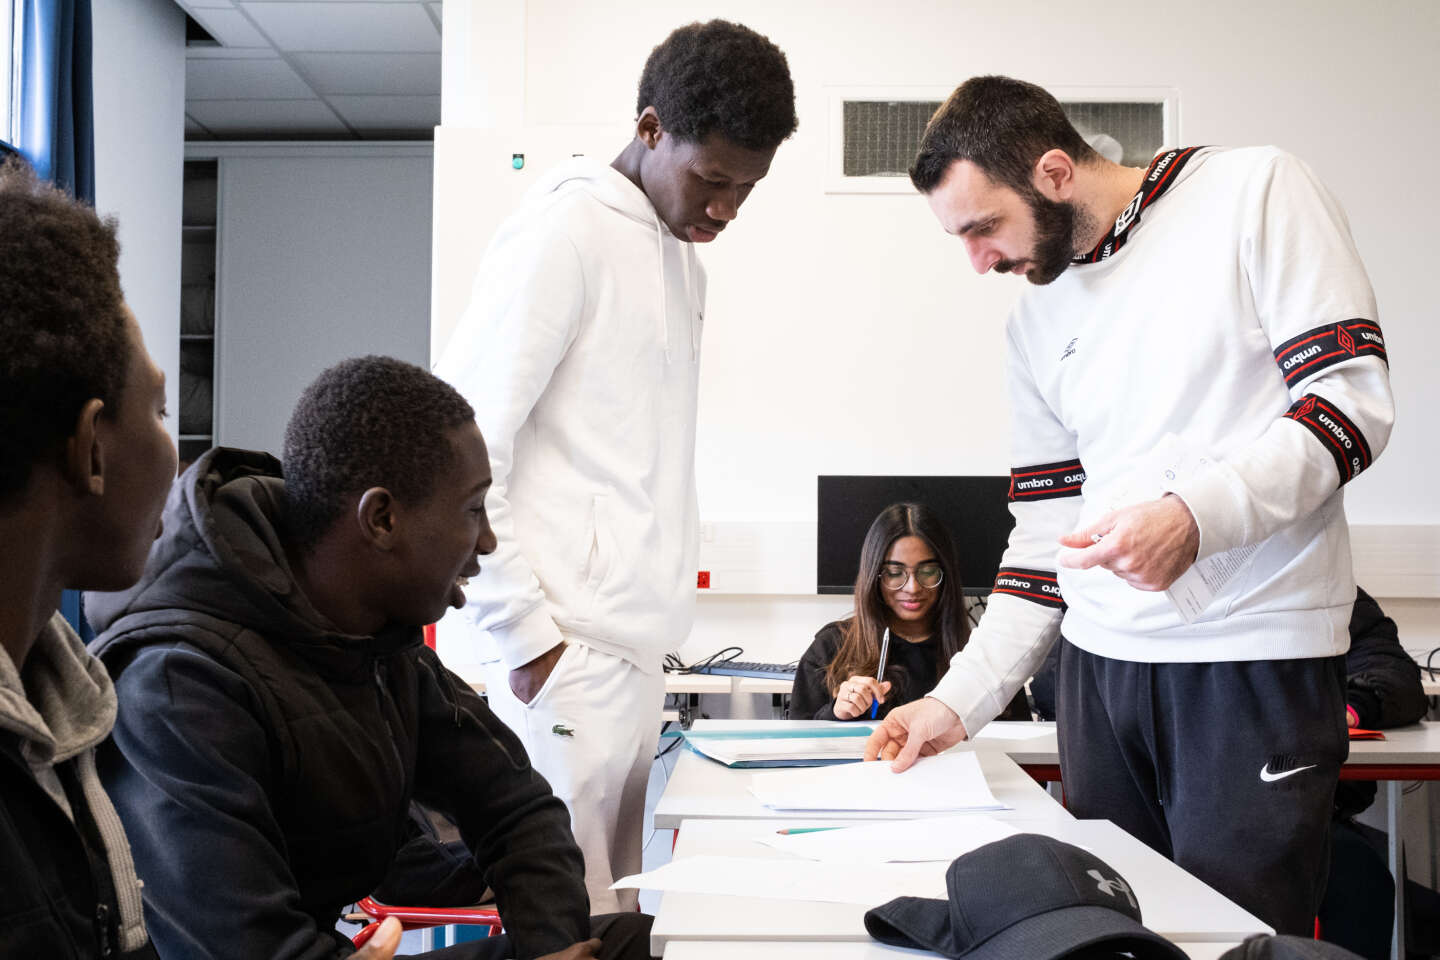 at the Arthur-Rimbaud vocational high school in La Courneuve, a “JO alternative” to dropping out of school